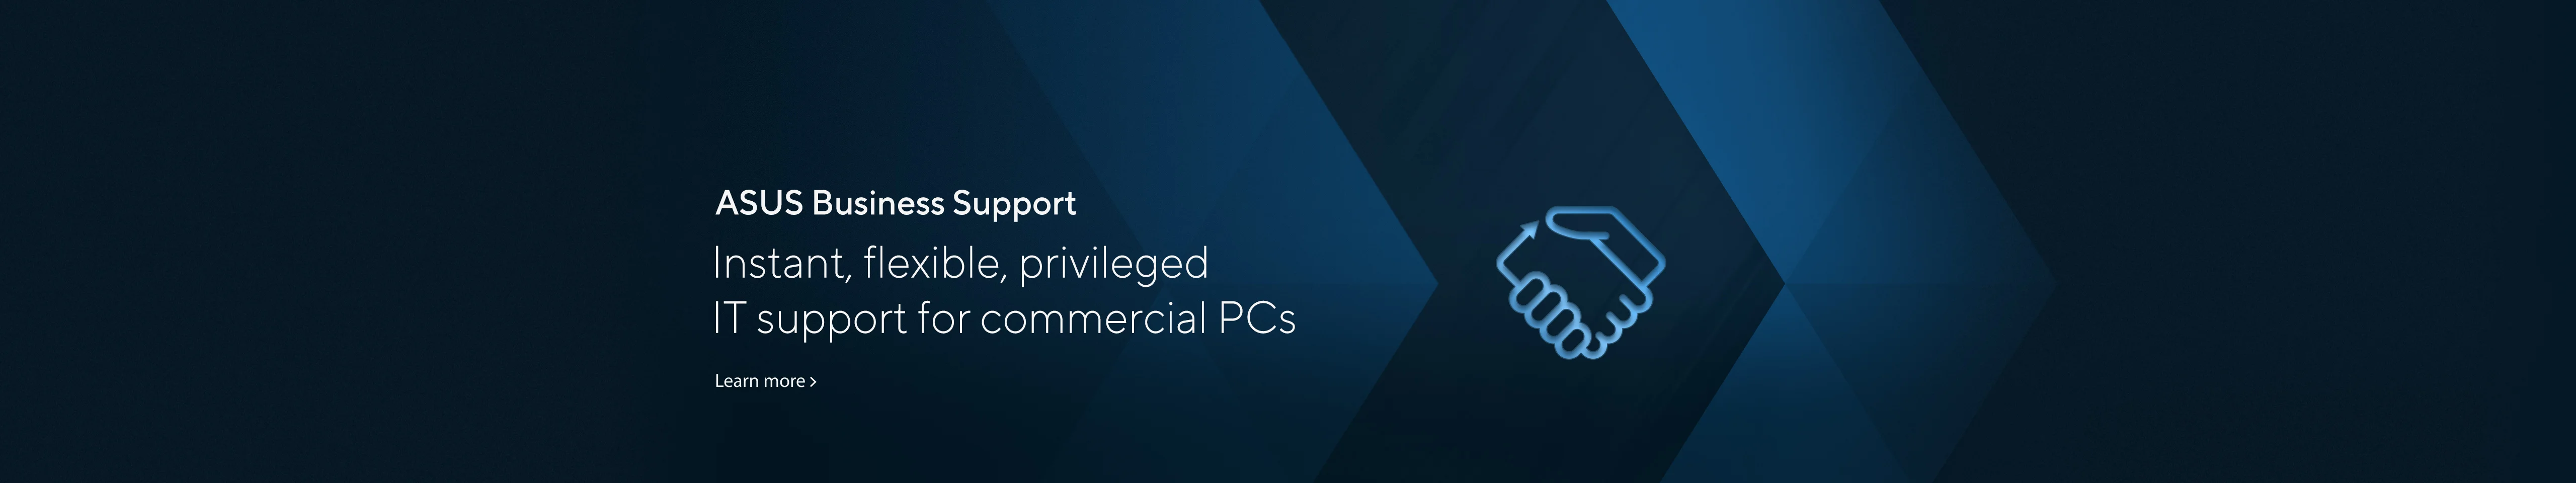 ASUS Business Support. Instant, flexible, privileged IT support for commercial PCs.